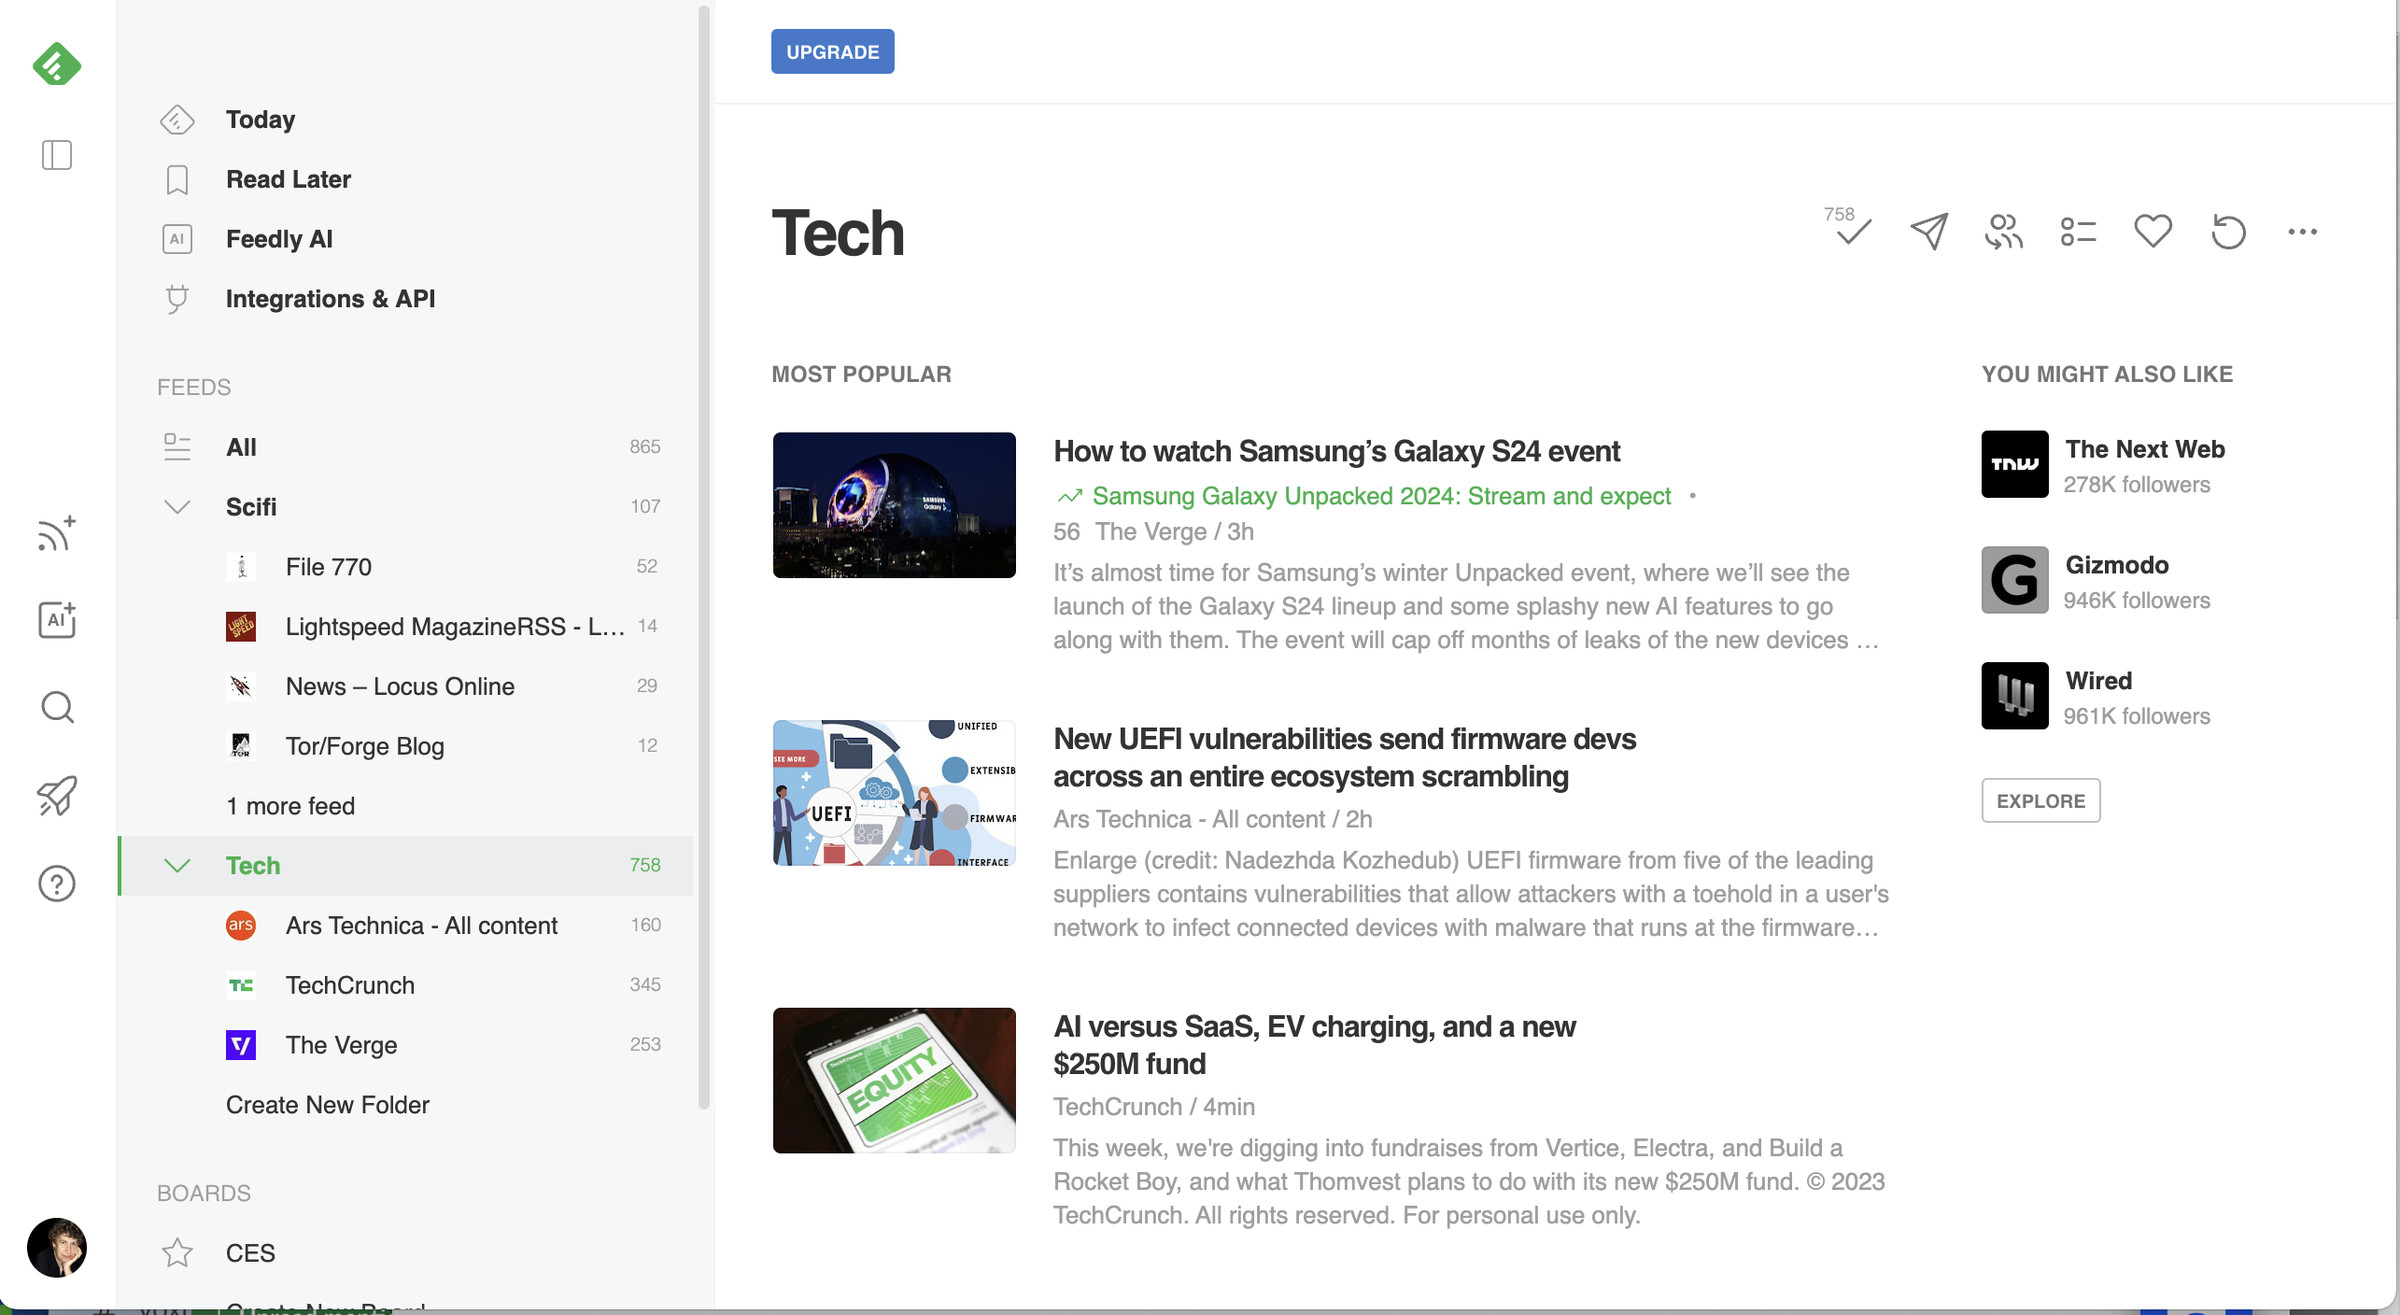 Feedly page for Tech feeds.